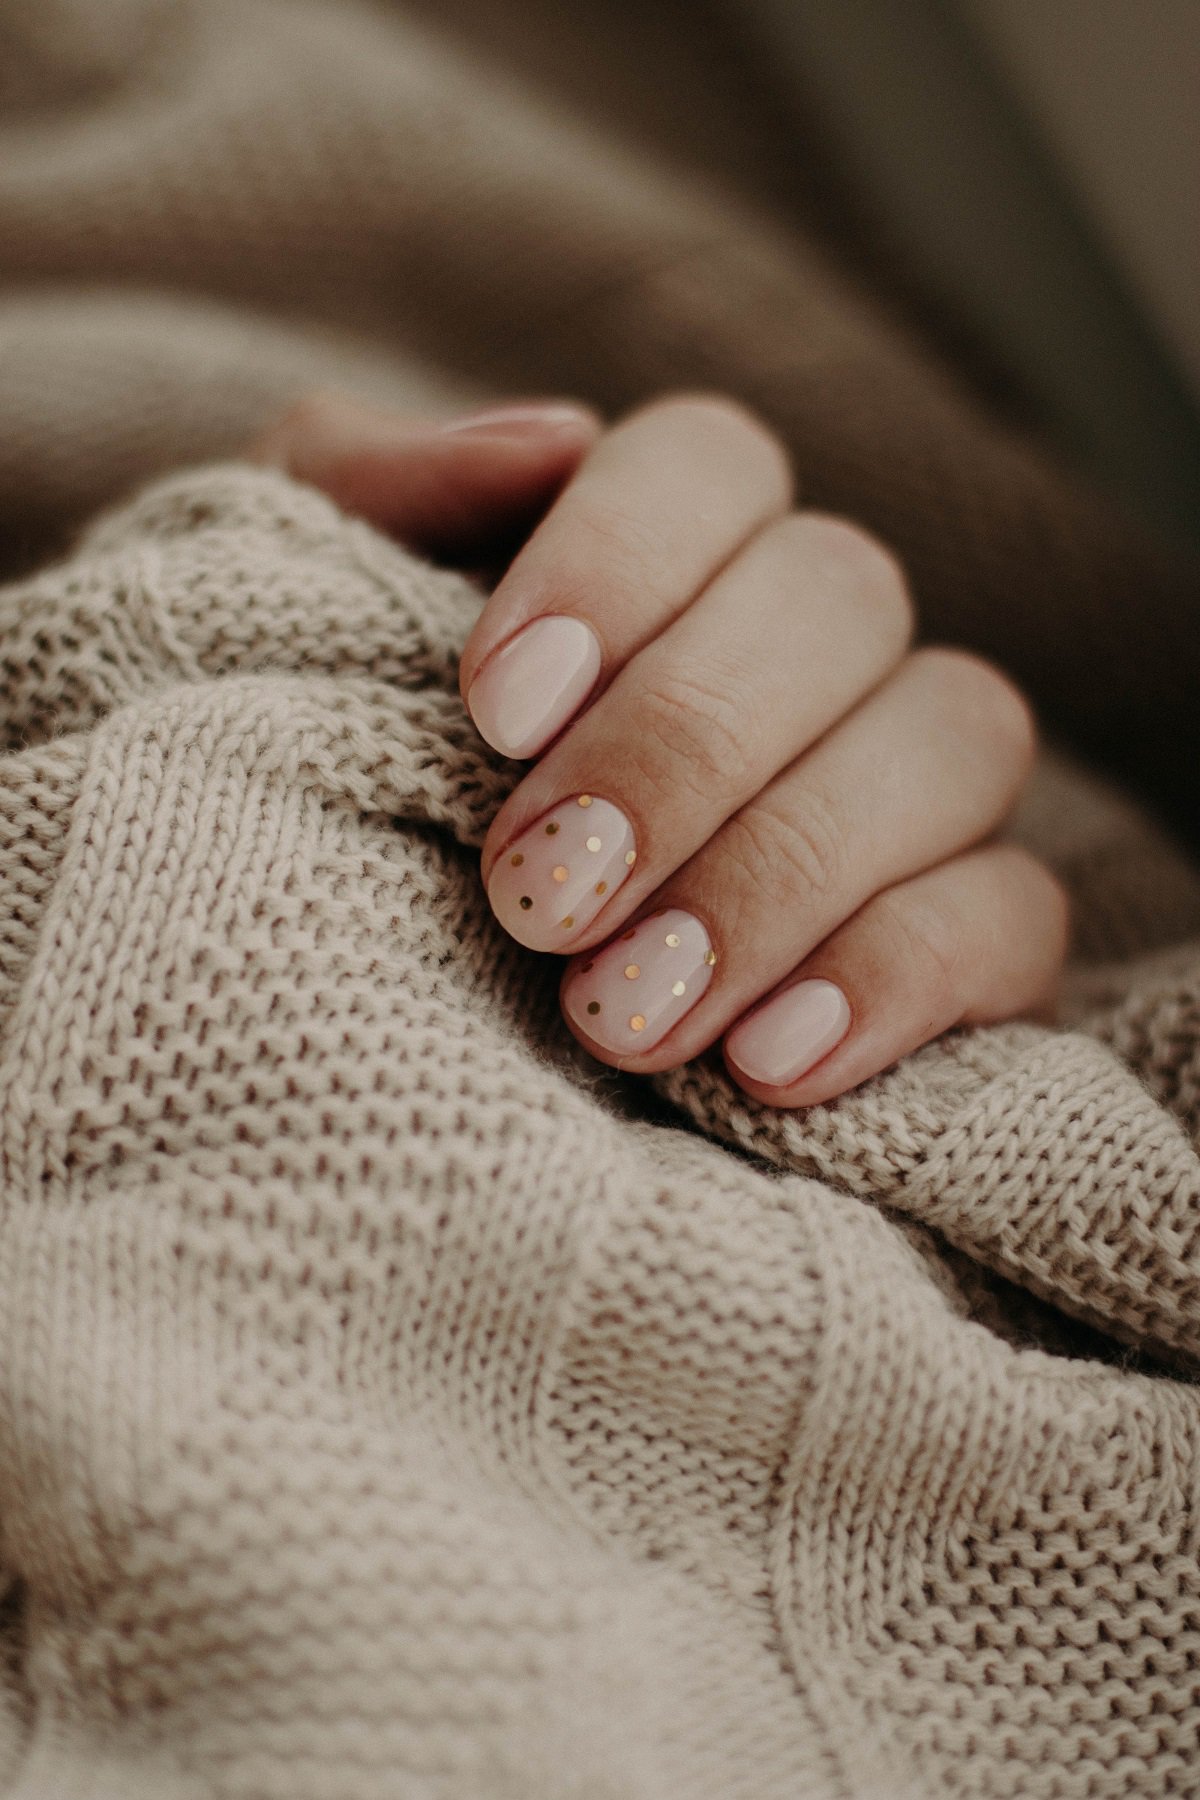 5 Ways To Achieve The Perfect Graduation Nails For Your Special Day